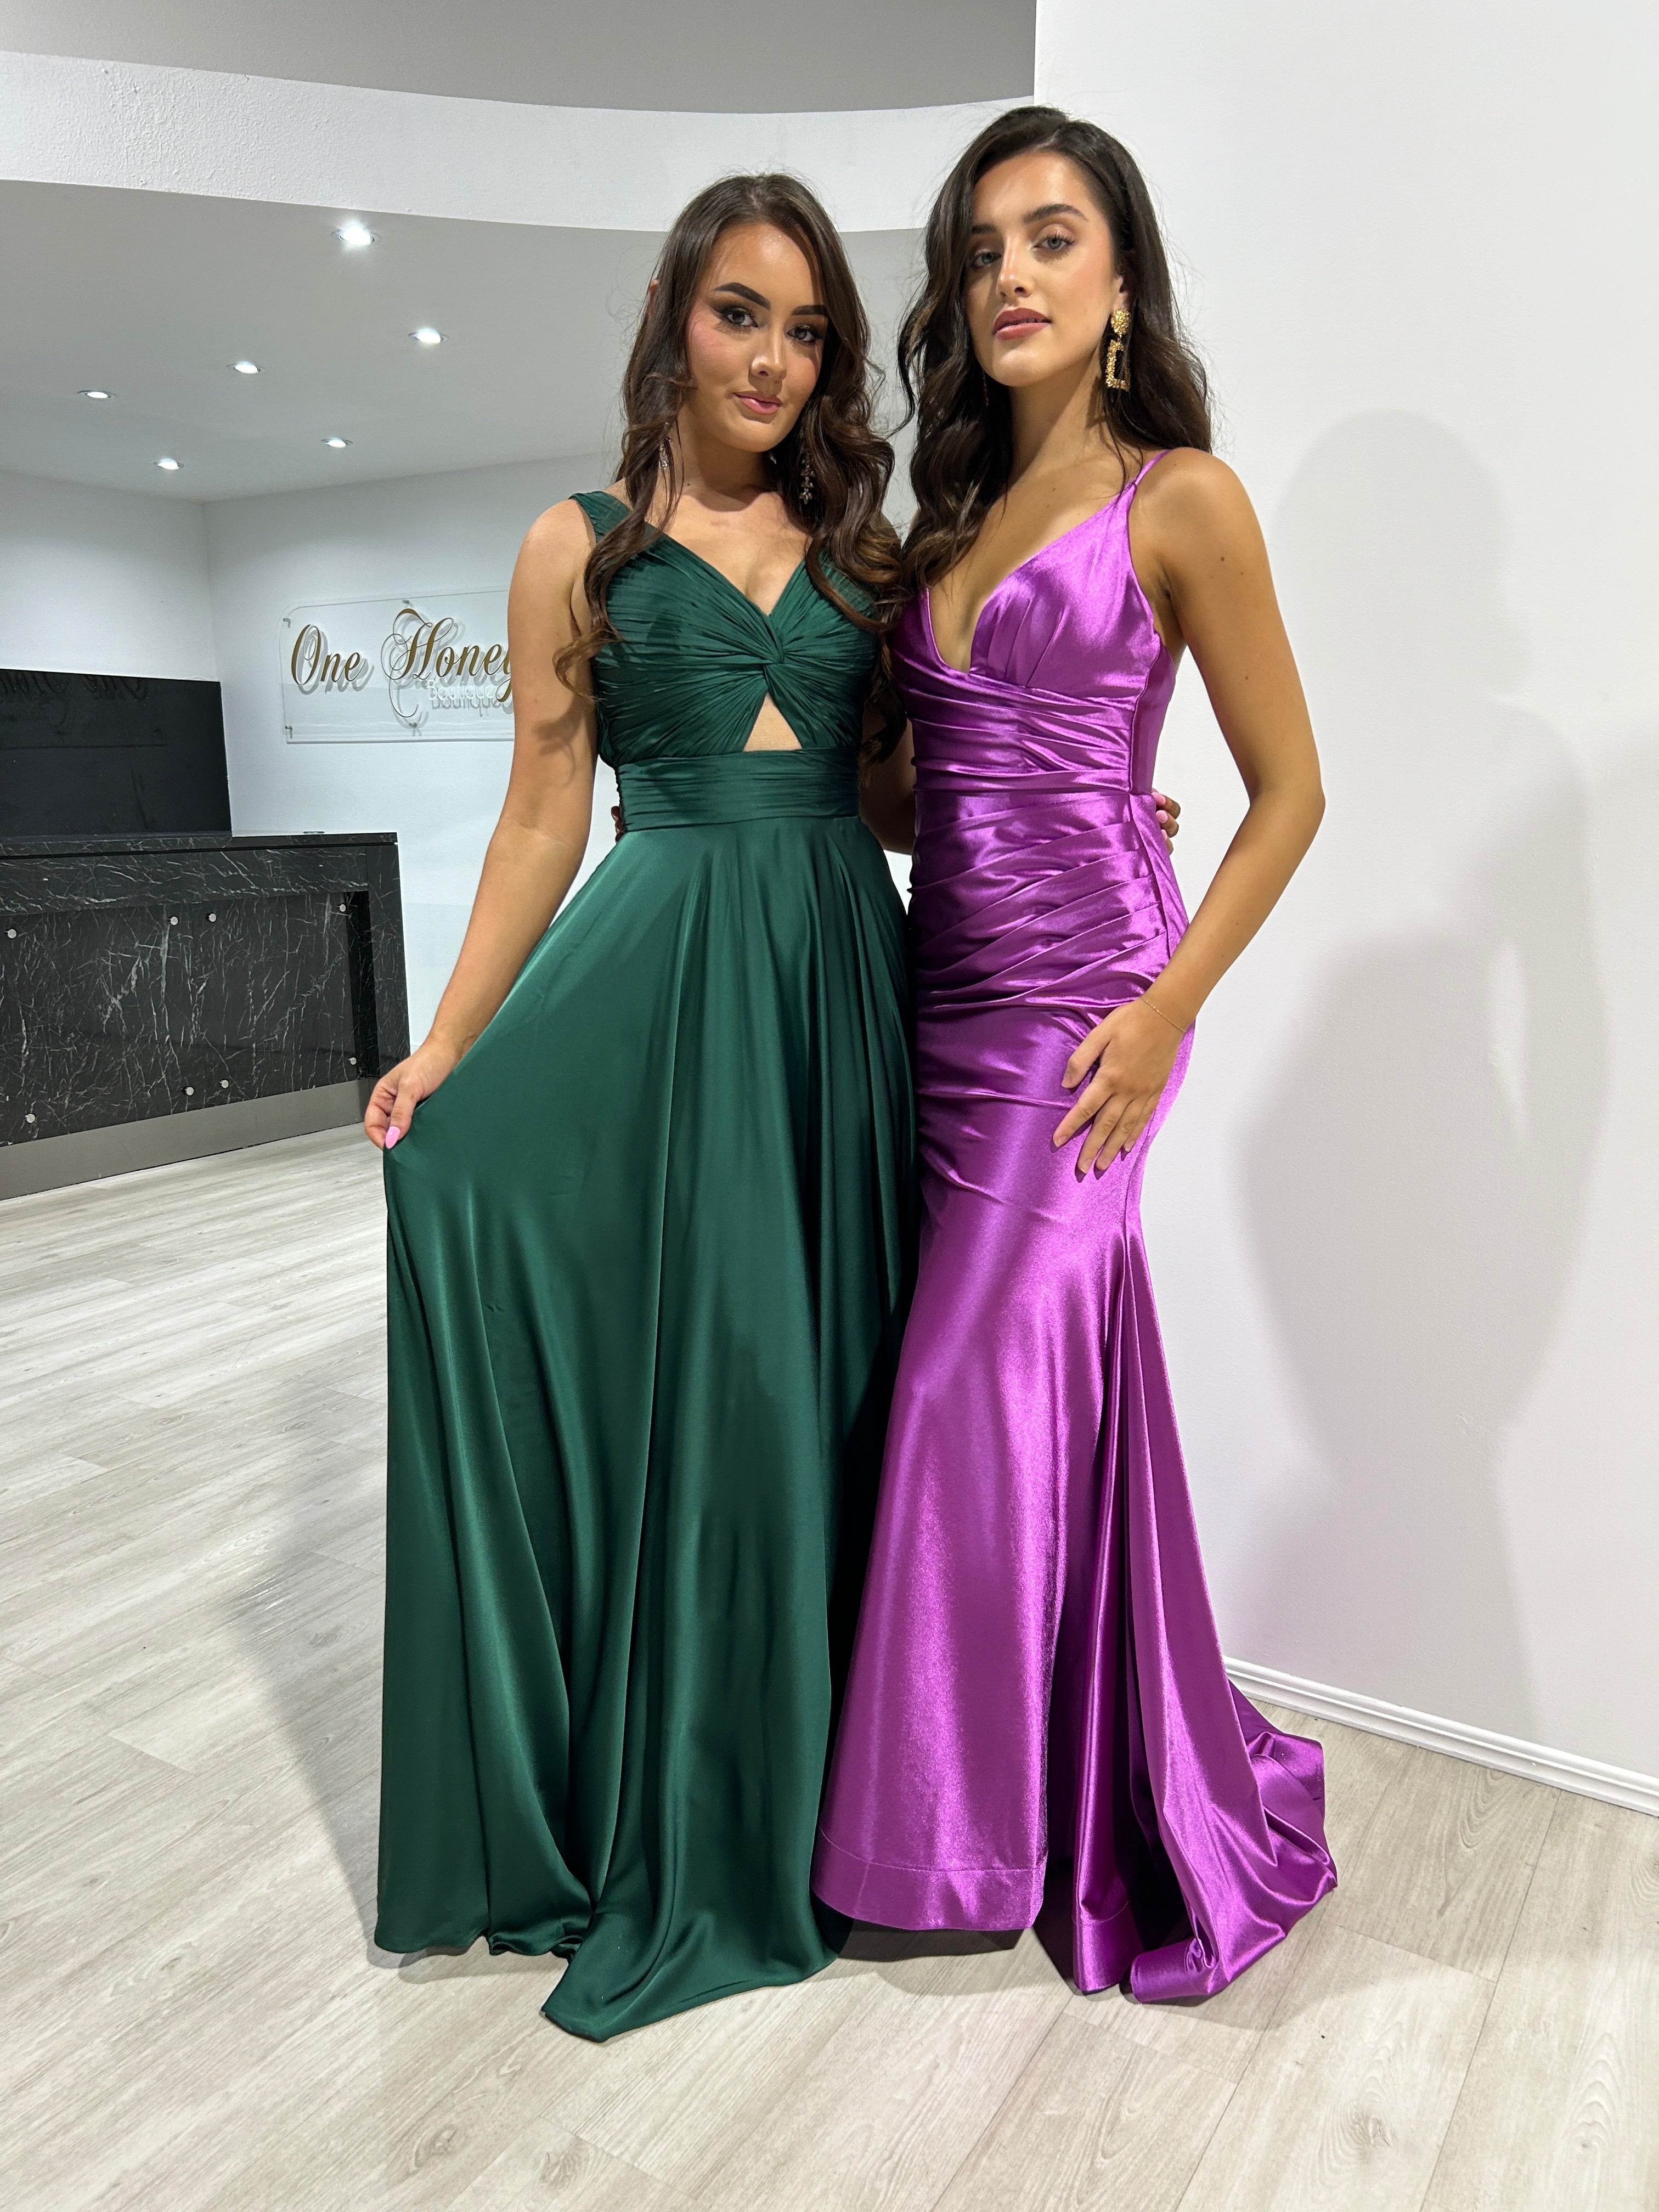 Honey Couture WILLOWMENA Emerald Green Keyhole Silky A Line Bridesmaid Formal Dress